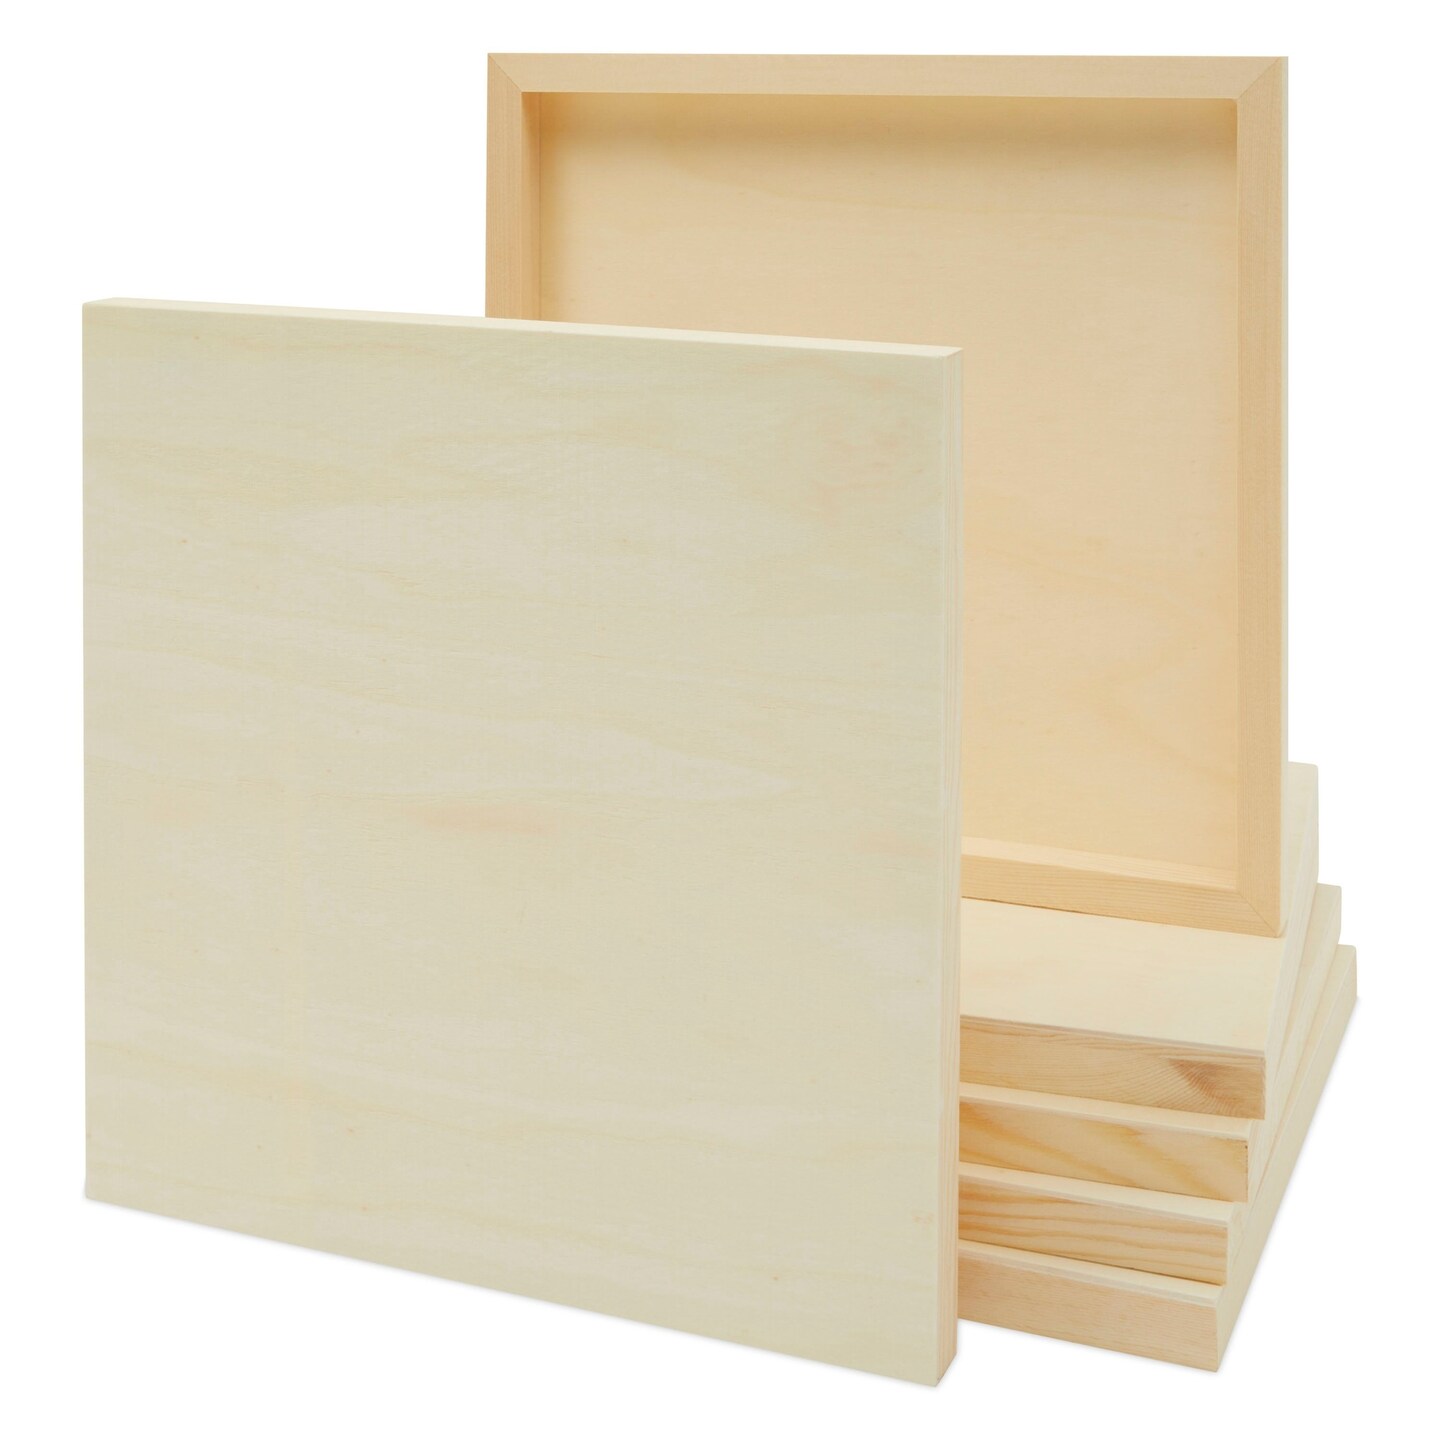 Good Wood by Leisure Arts - Offset Pallet Panel 16.5x12.25 Wood Panel,  Wood Board, Wood Craft, Wood Blanks, Thin Wood Boards for Crafts, Wooden